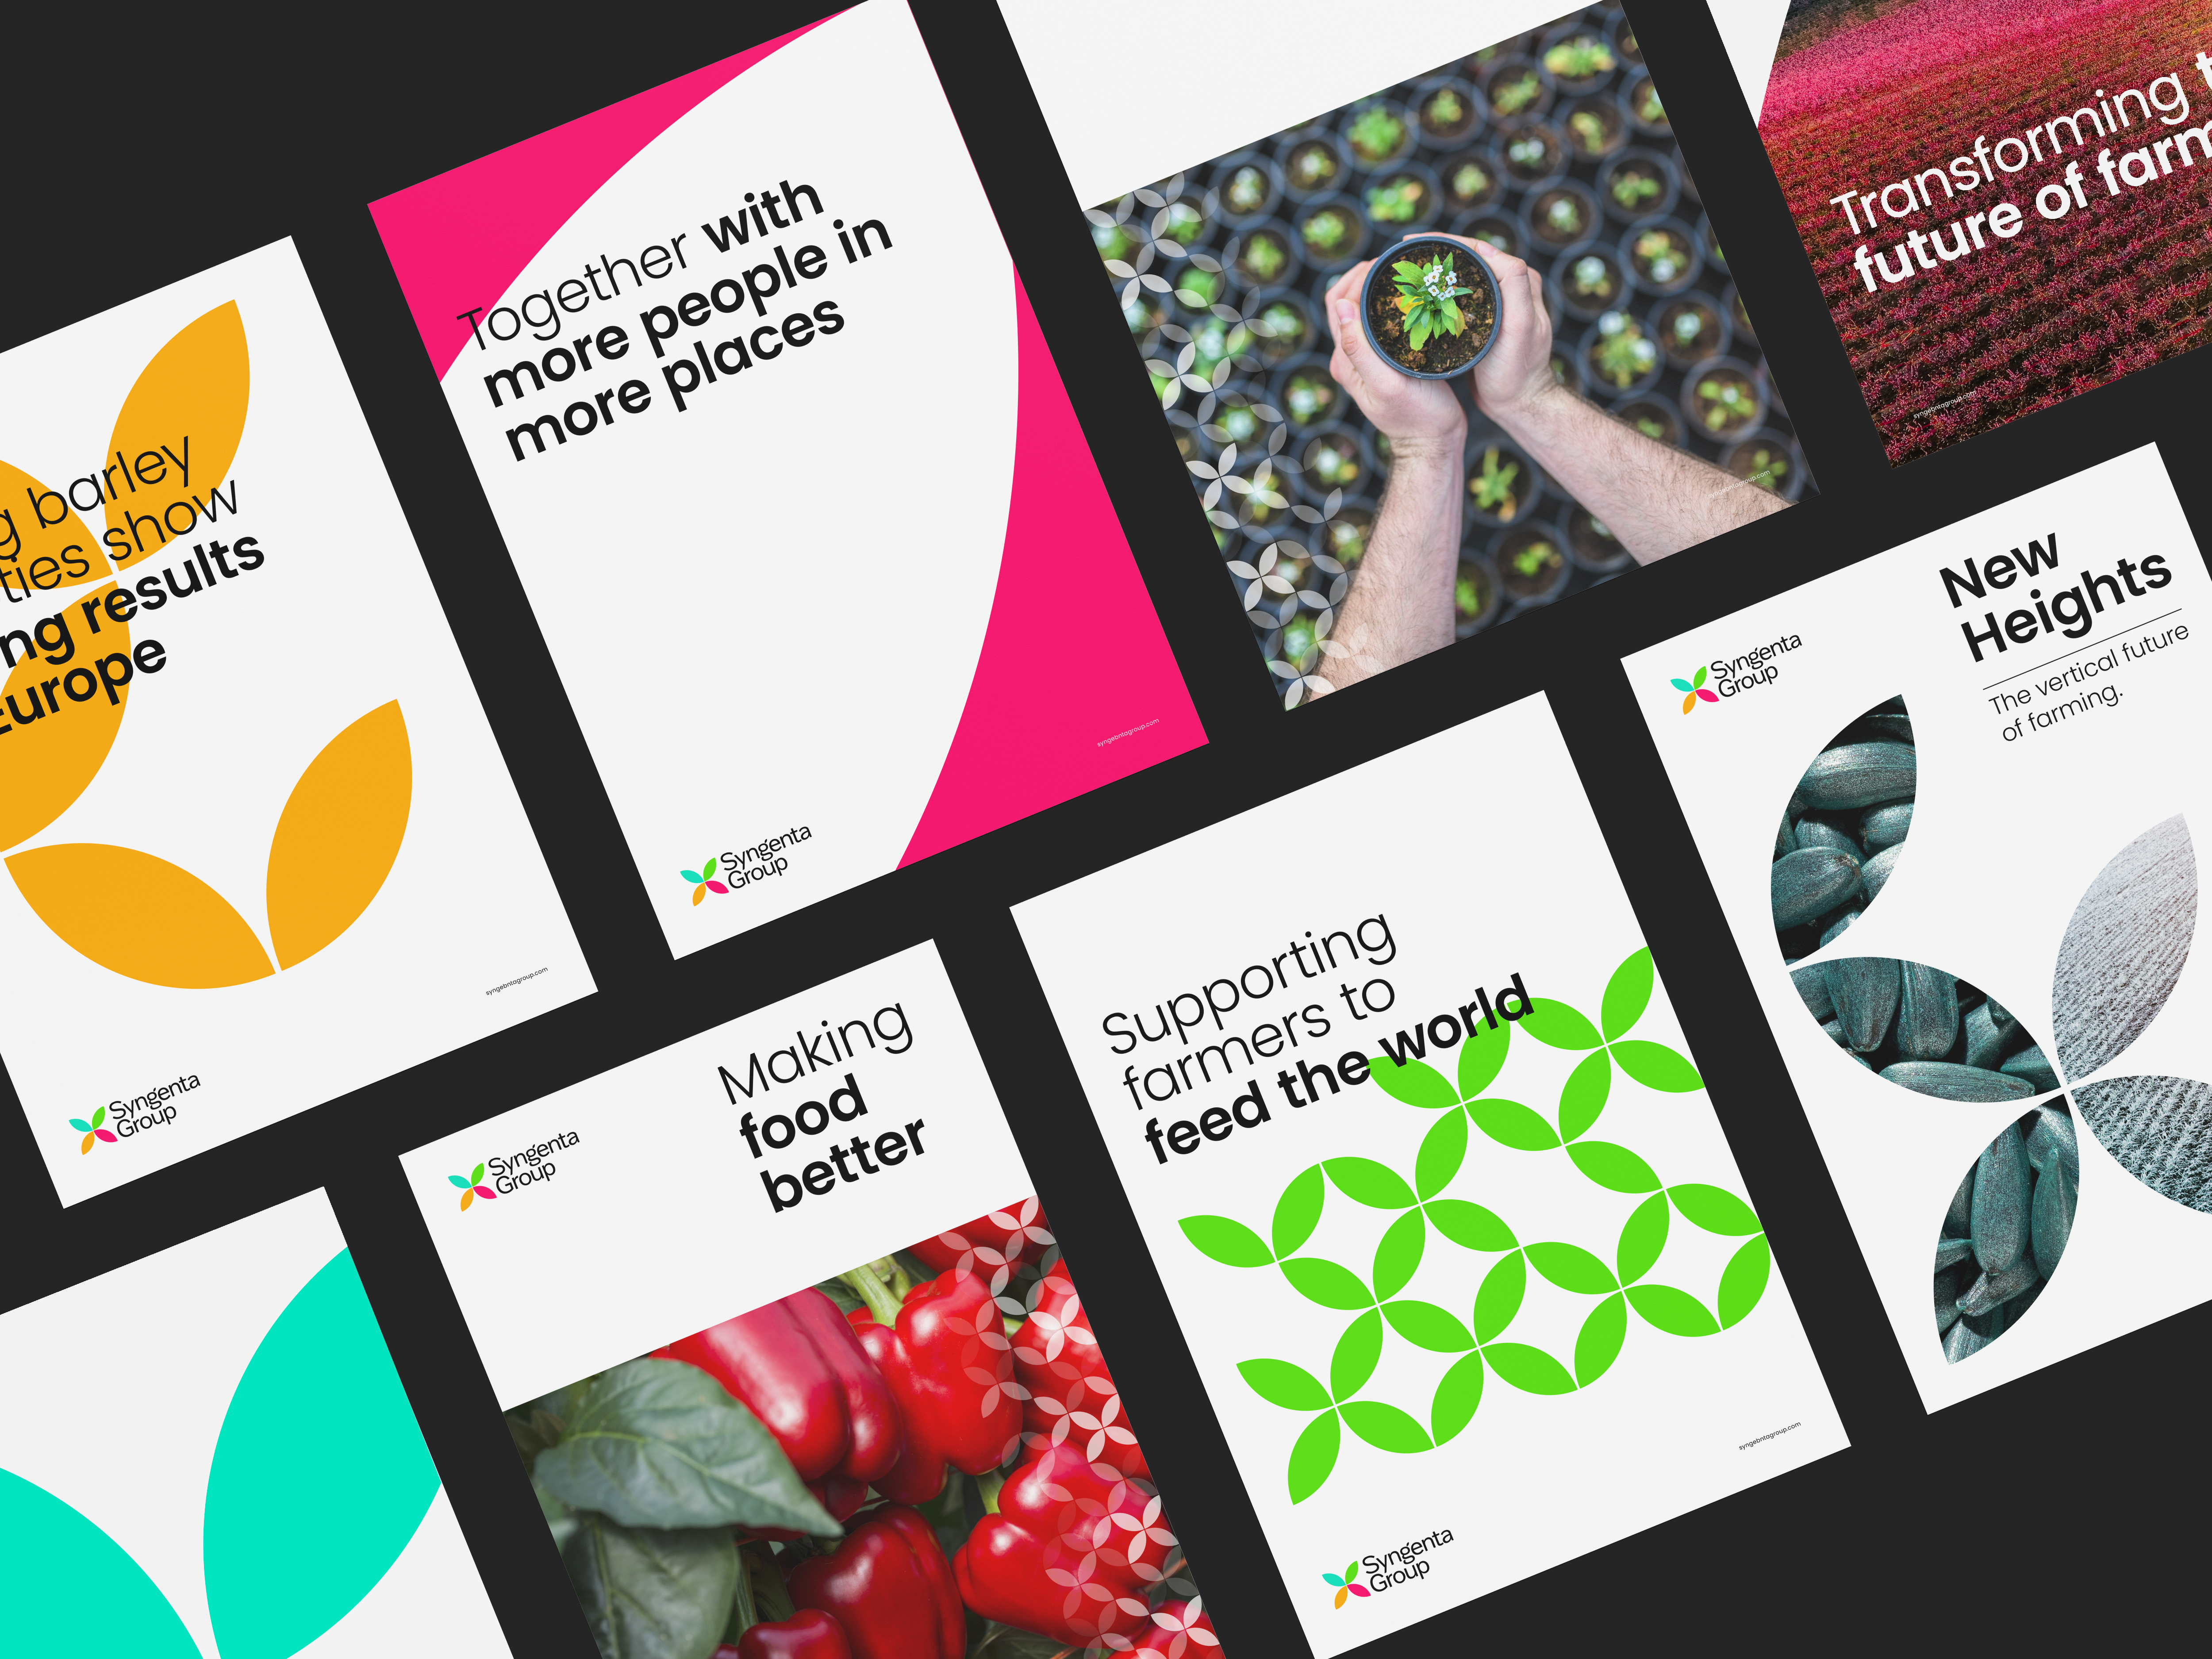 Eight newly designed posters from Syngenta Group’s recent rebranding work with Siegel+Gale